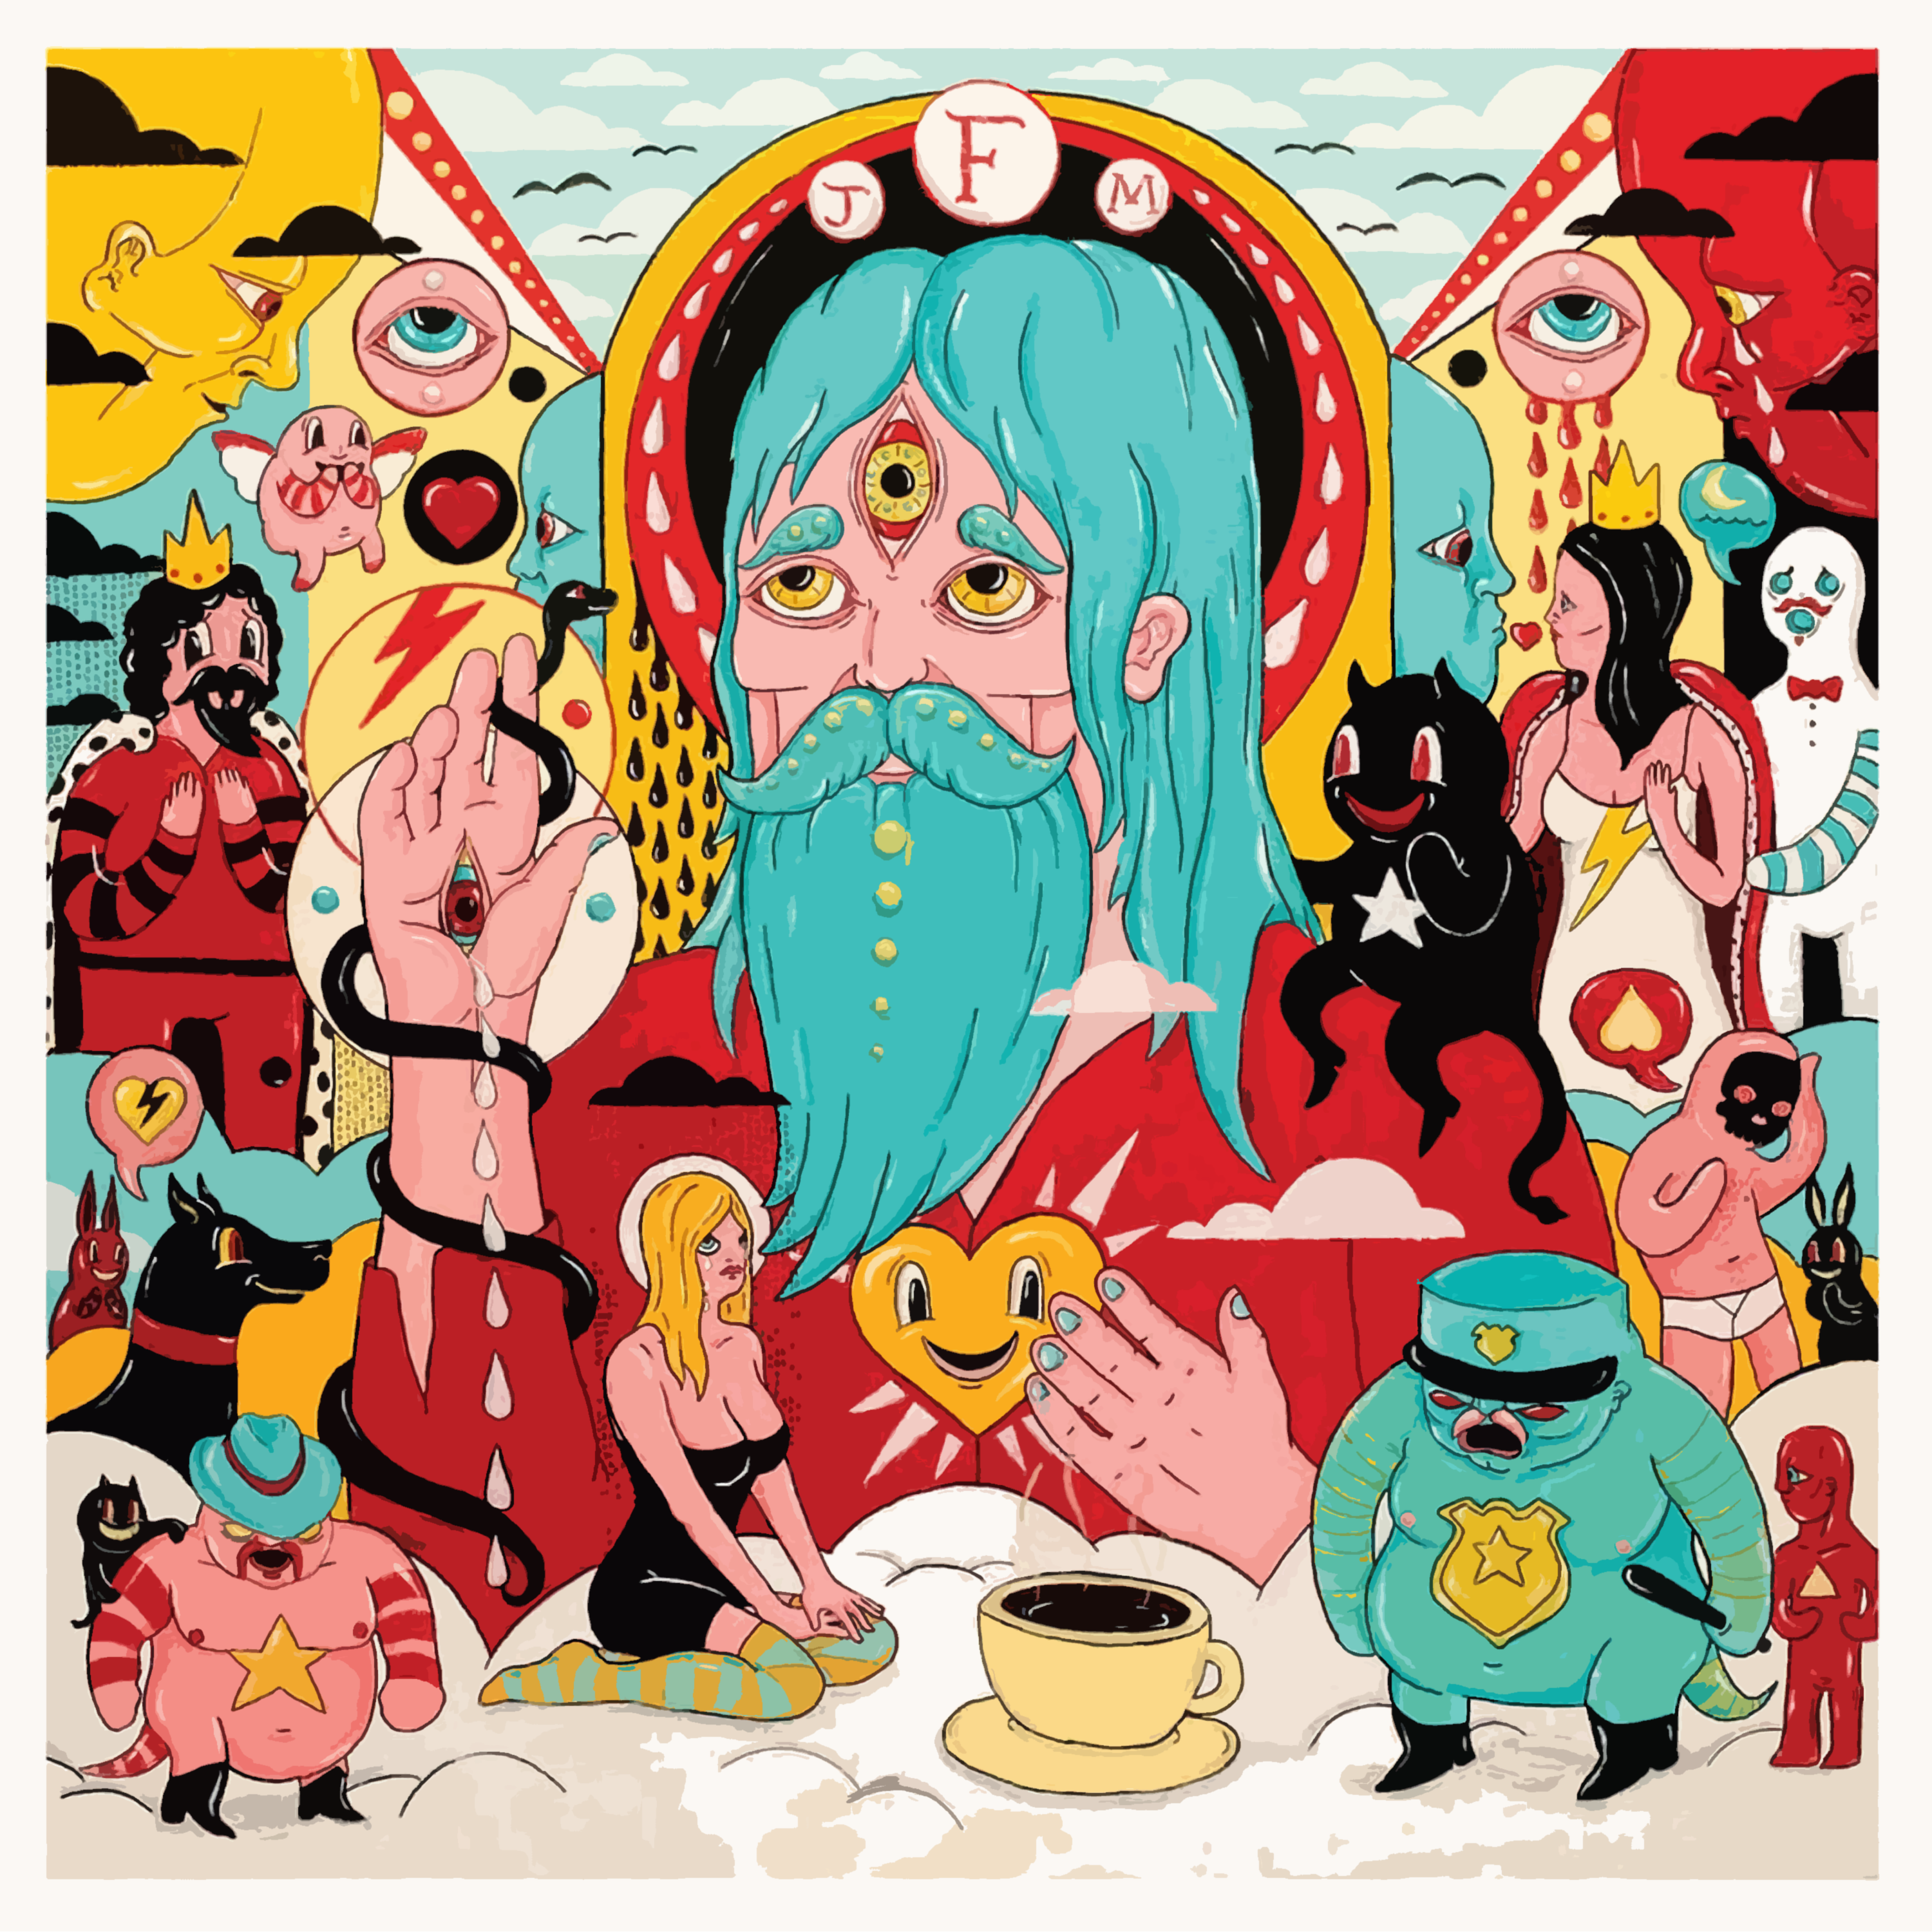 General 3000x3000 father john misty music artwork cyan hair psychedelic cyan red